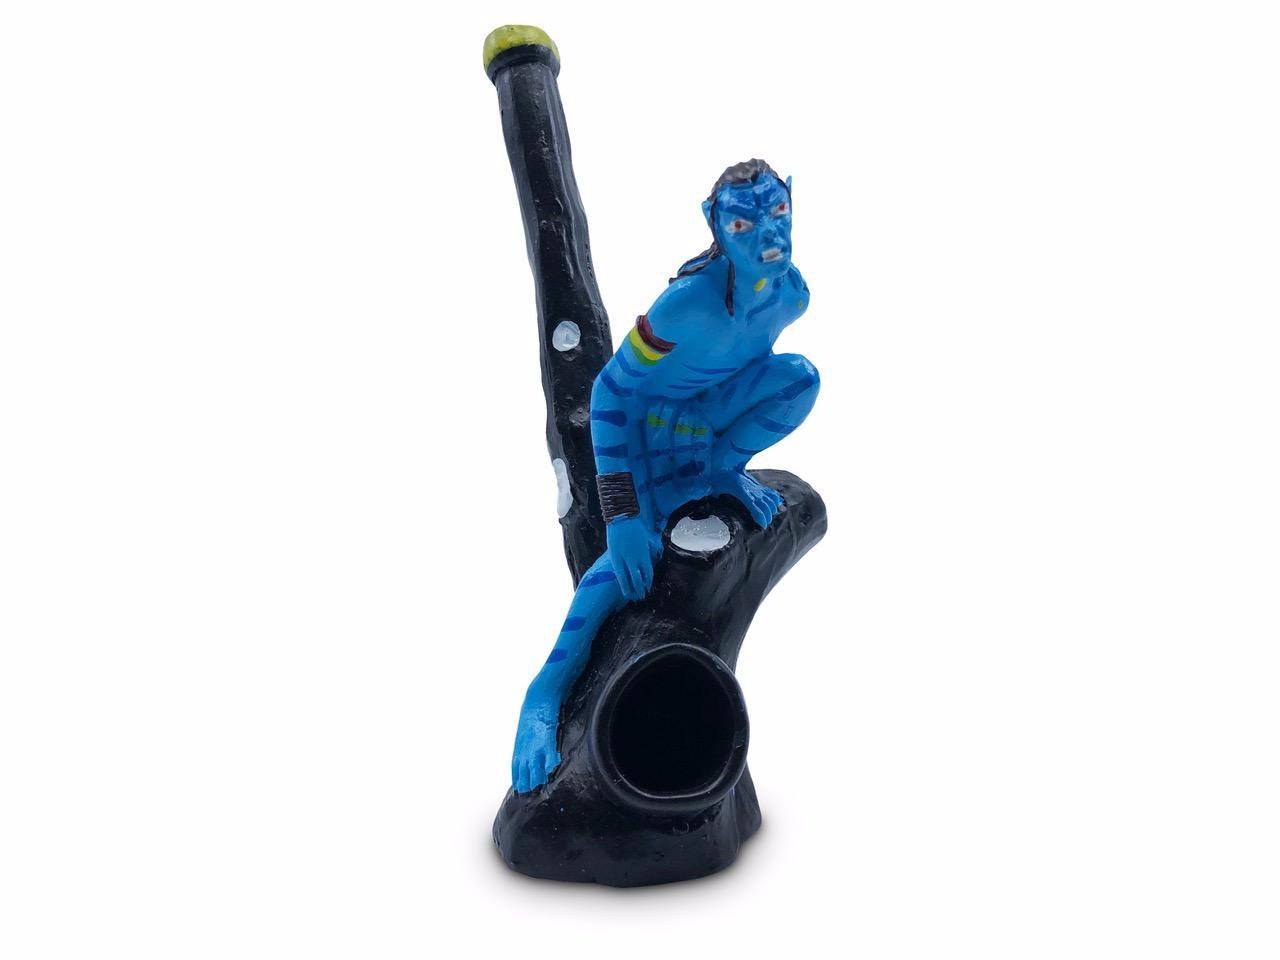 Resin Pipe - Blue Creature Pipes Puff Wholesale 